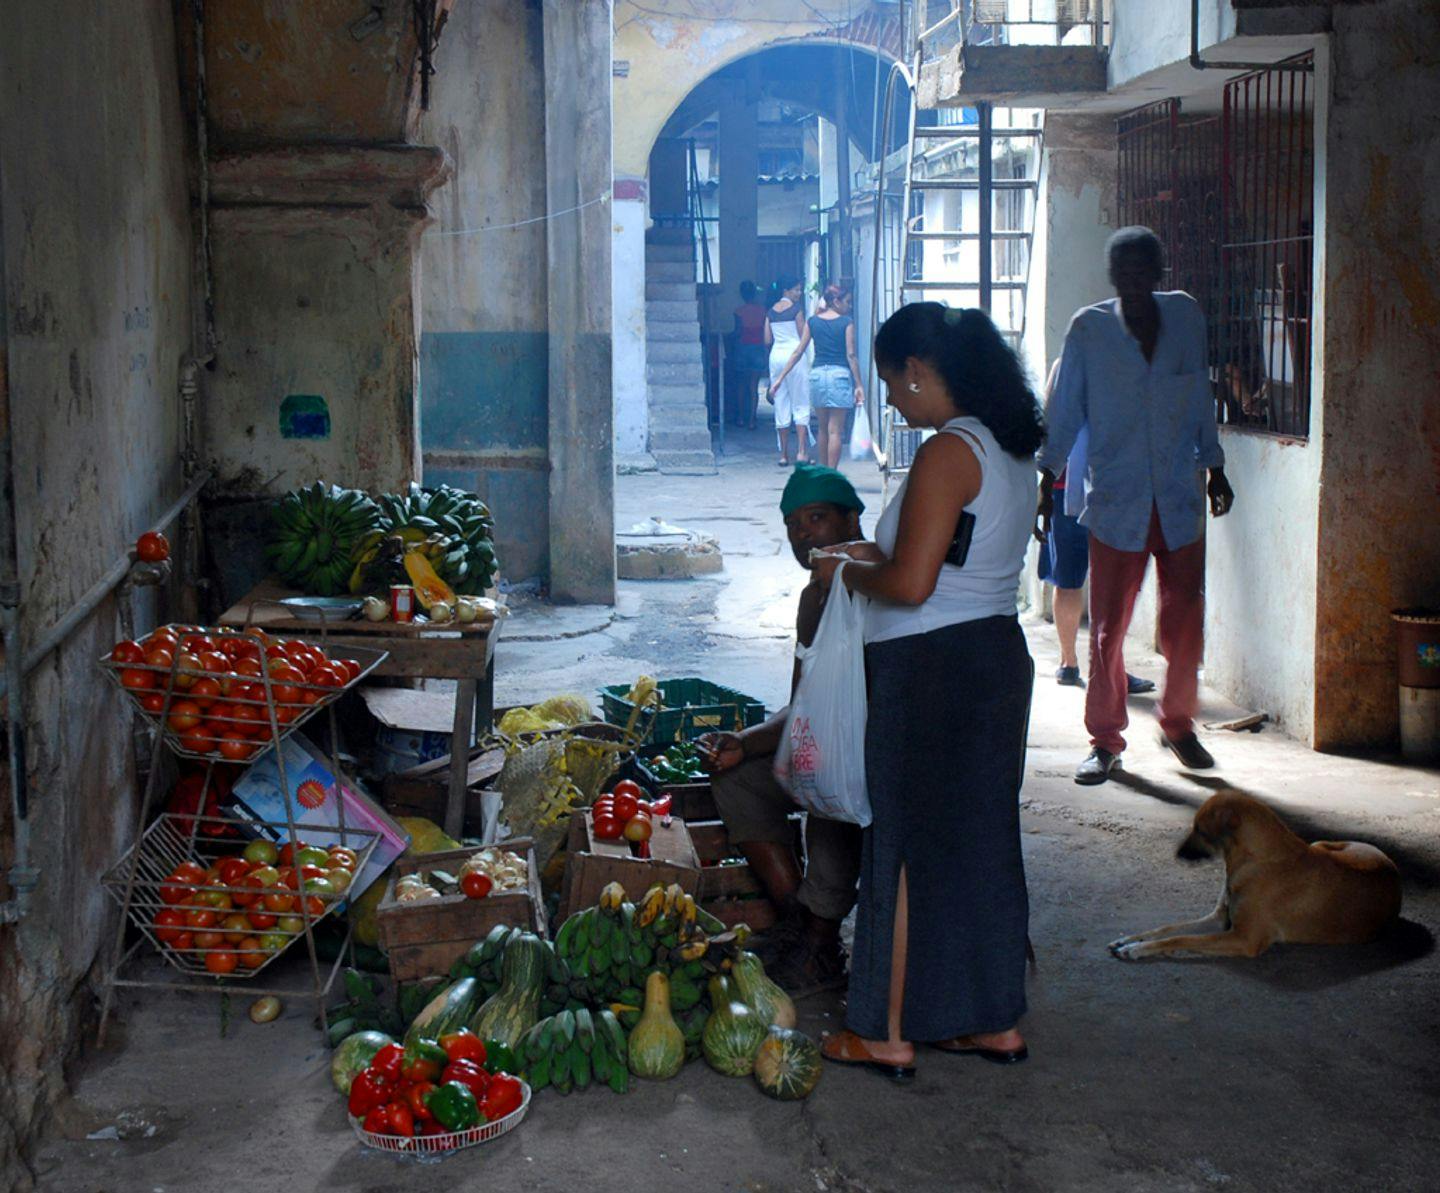 A small shop in a back-street. Photo: Ronald Toppe